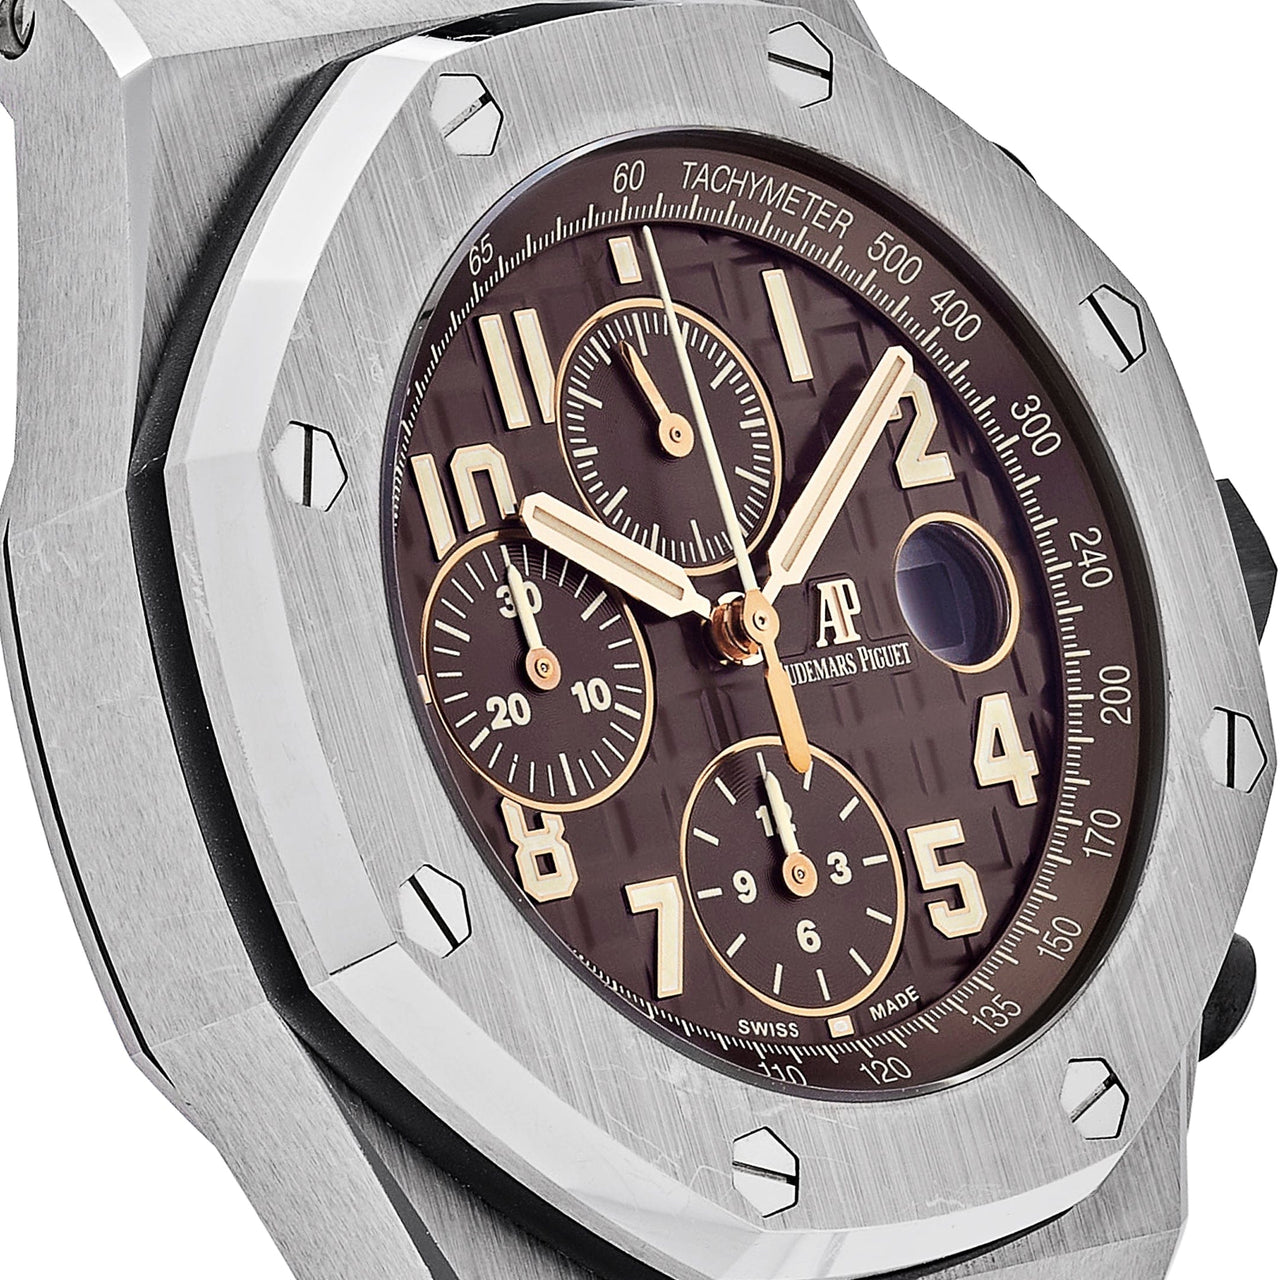 Audemars Piguet Royal Oak Offshore Chronograph 26470ST.OO.A820CR.01 Stainless Steel Brown Dial